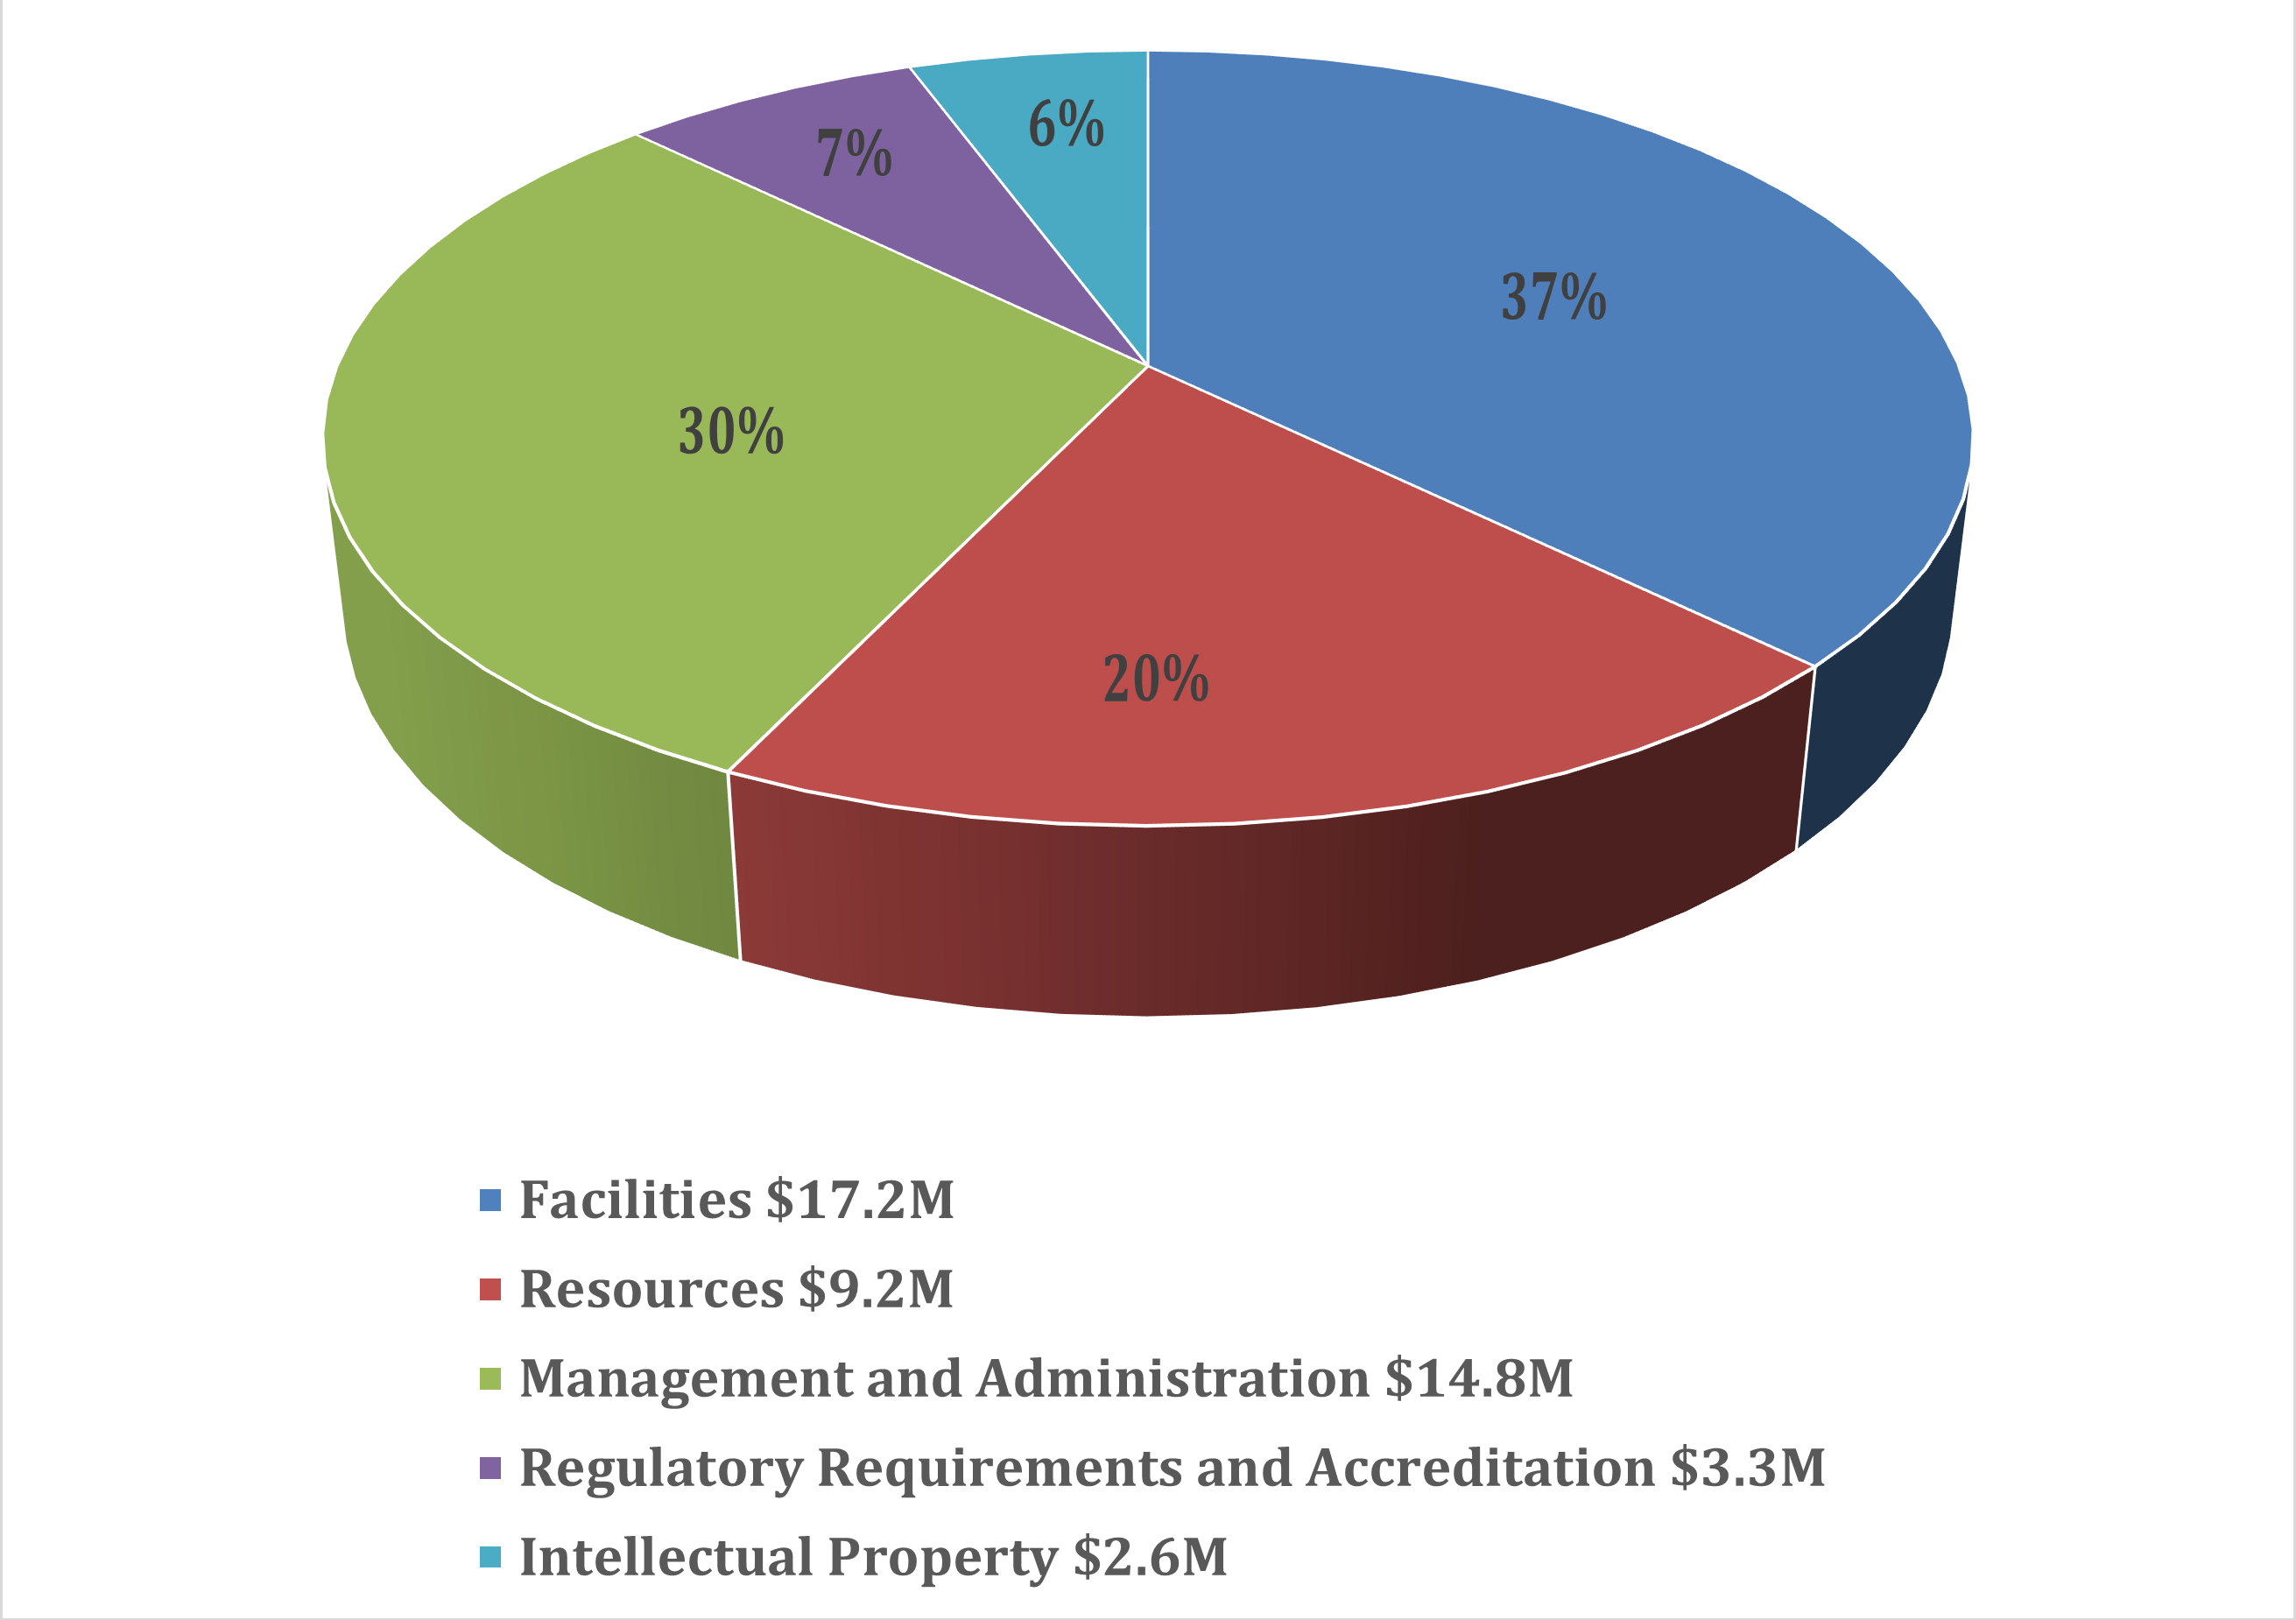 Pie chart detailing breakdown of RSF funds into 5 expenditure categories: facilities, resources, management, regulatory requirements, and IP.